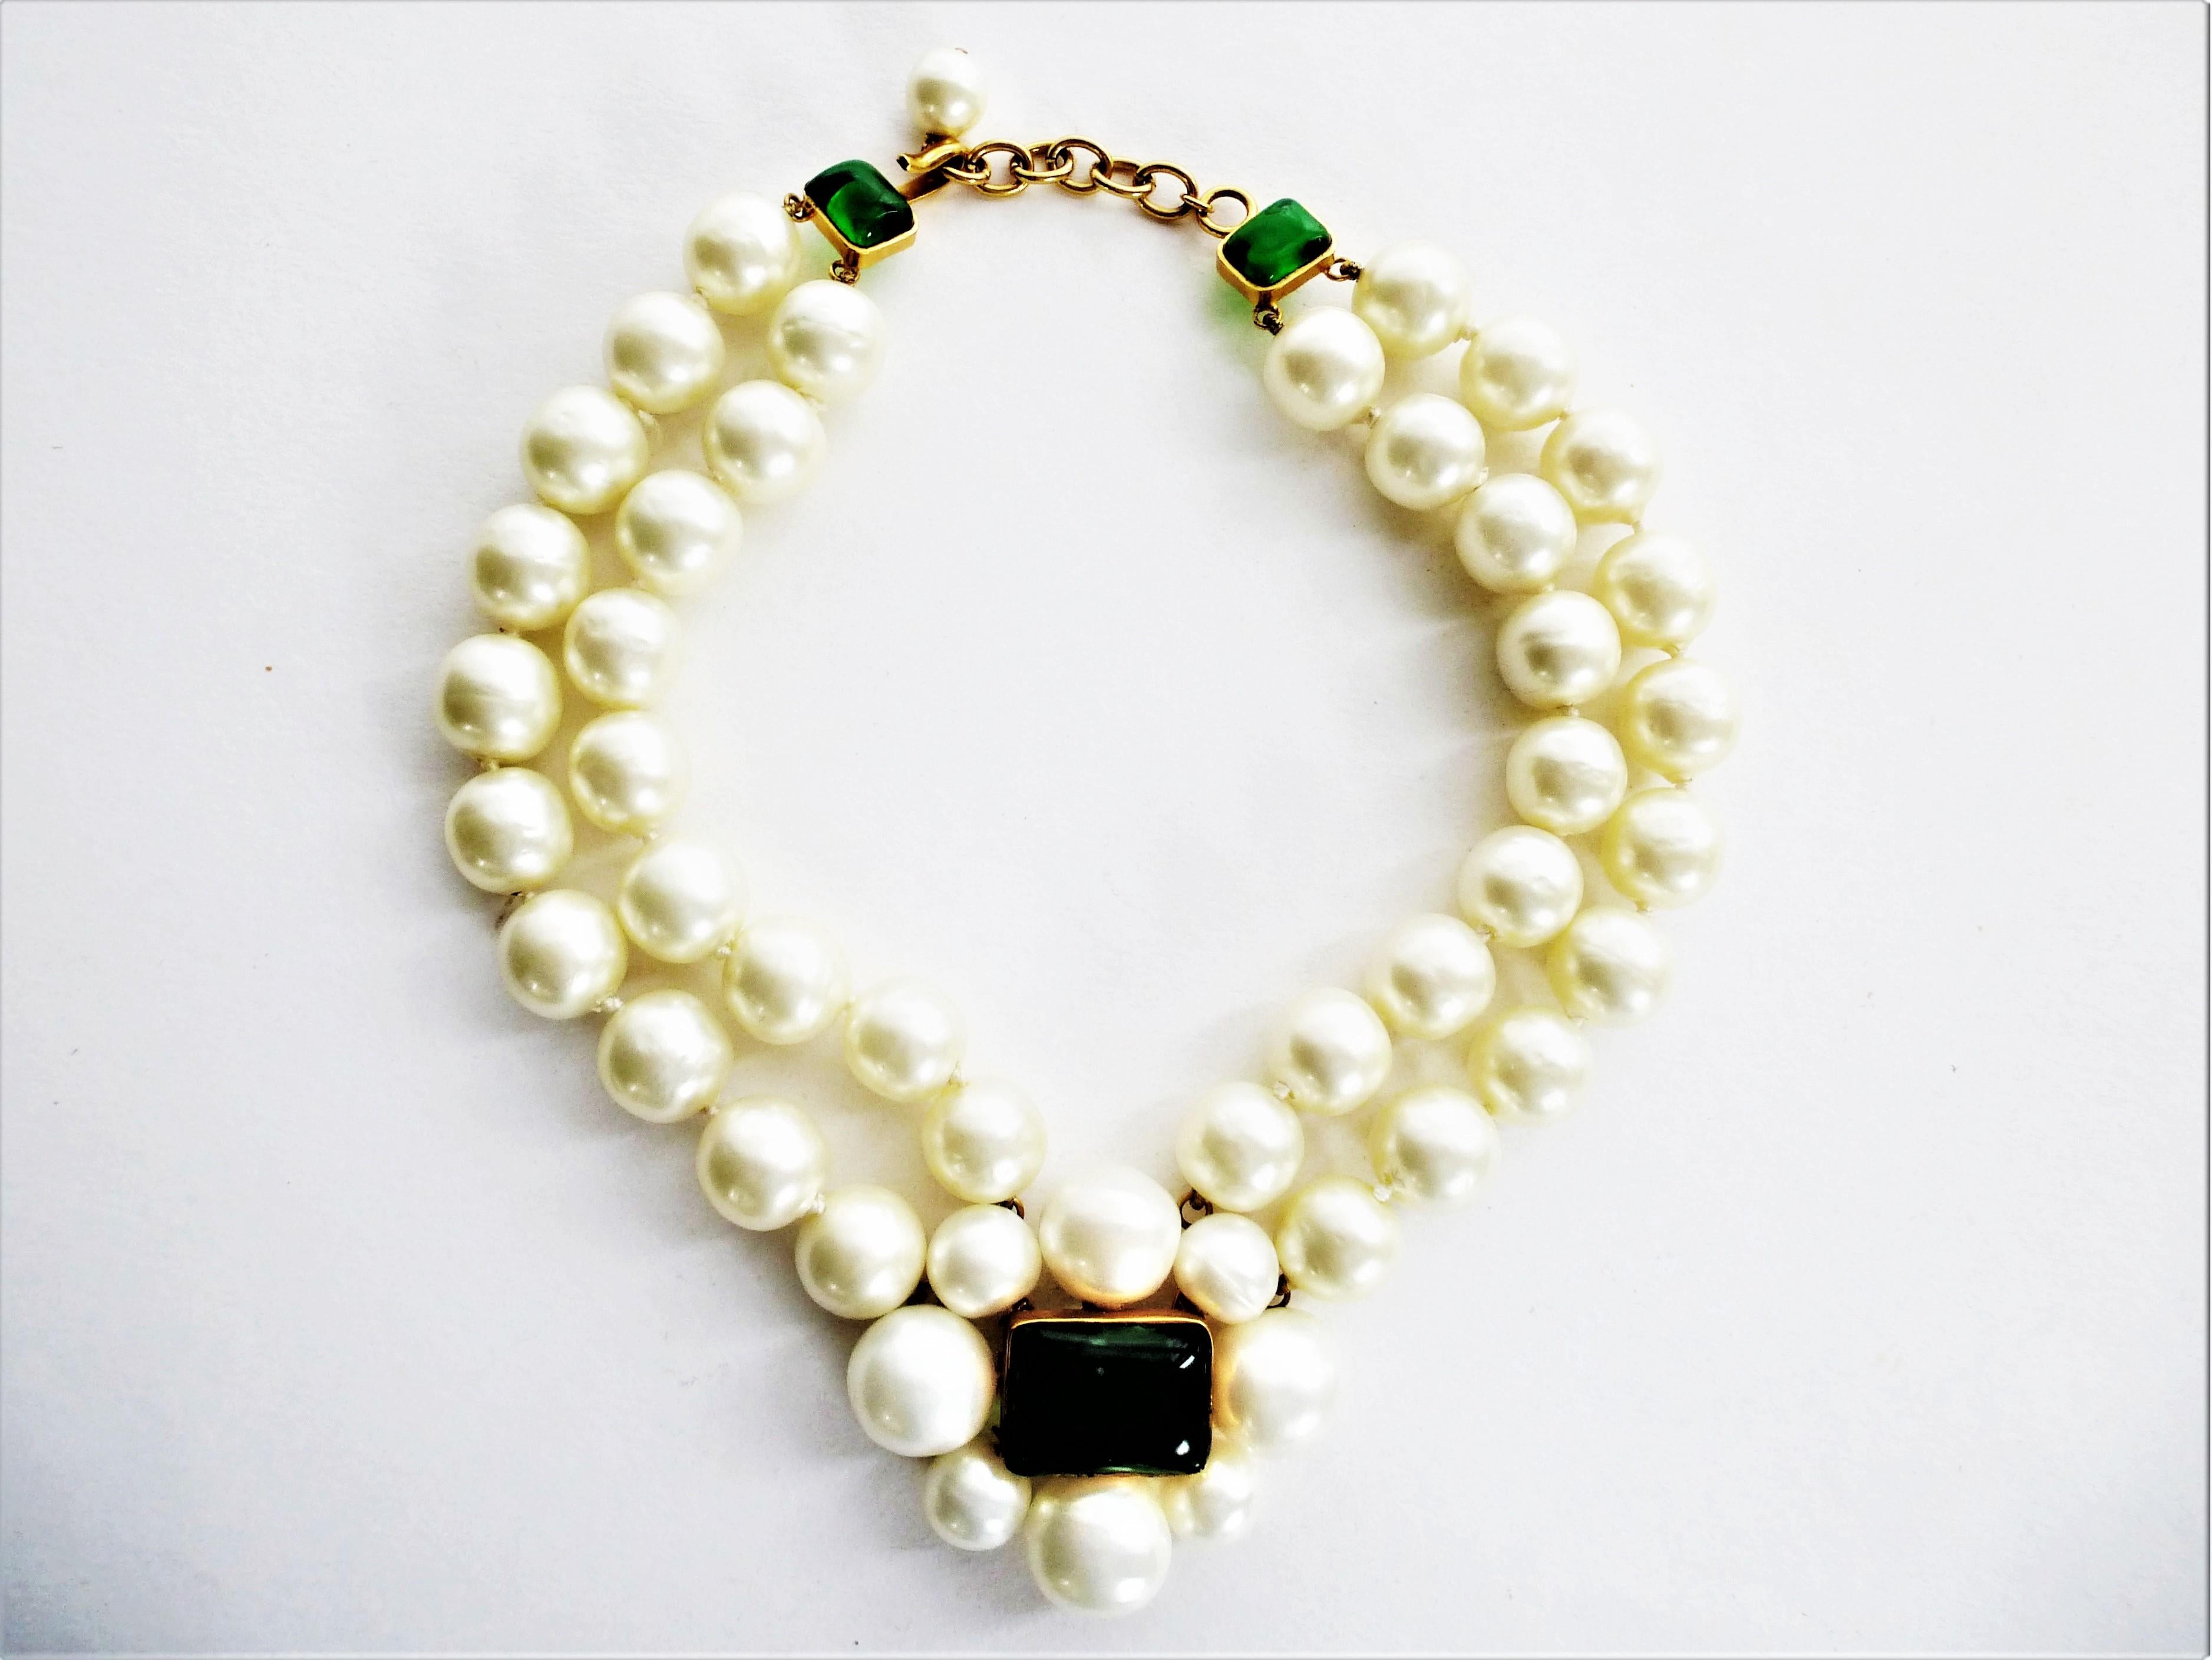 CHANEL 2 row collier with larg pearls,  green Gripoix signed 97A - 1997 Autumn For Sale 4